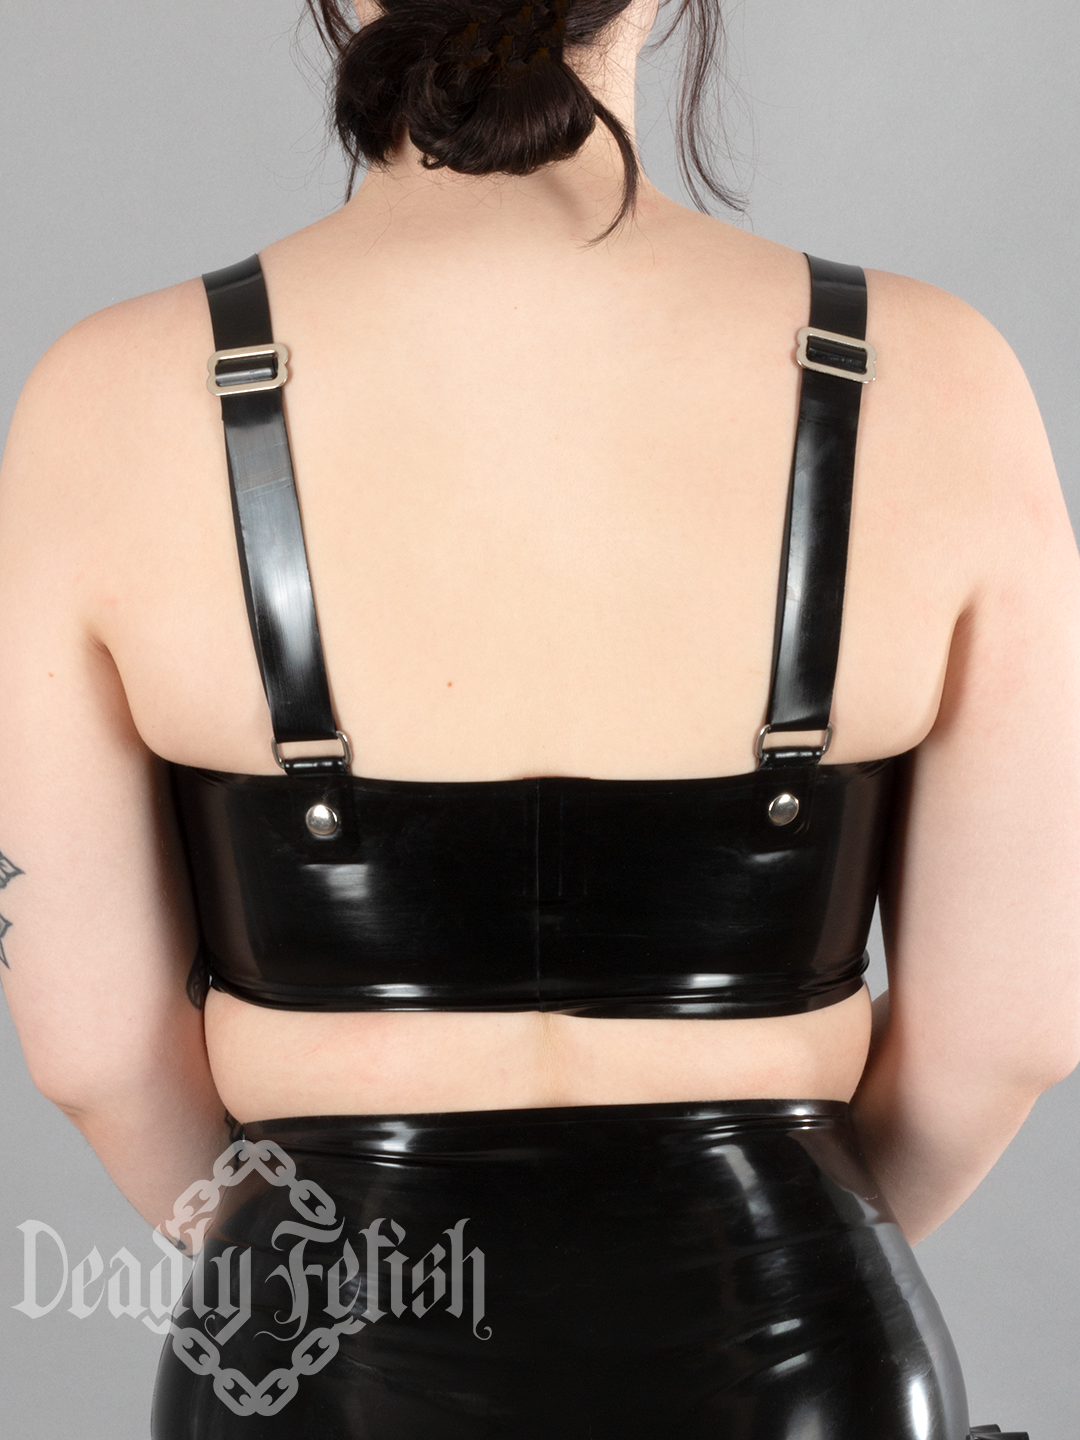 Deadly Fetish Latex: Top #26